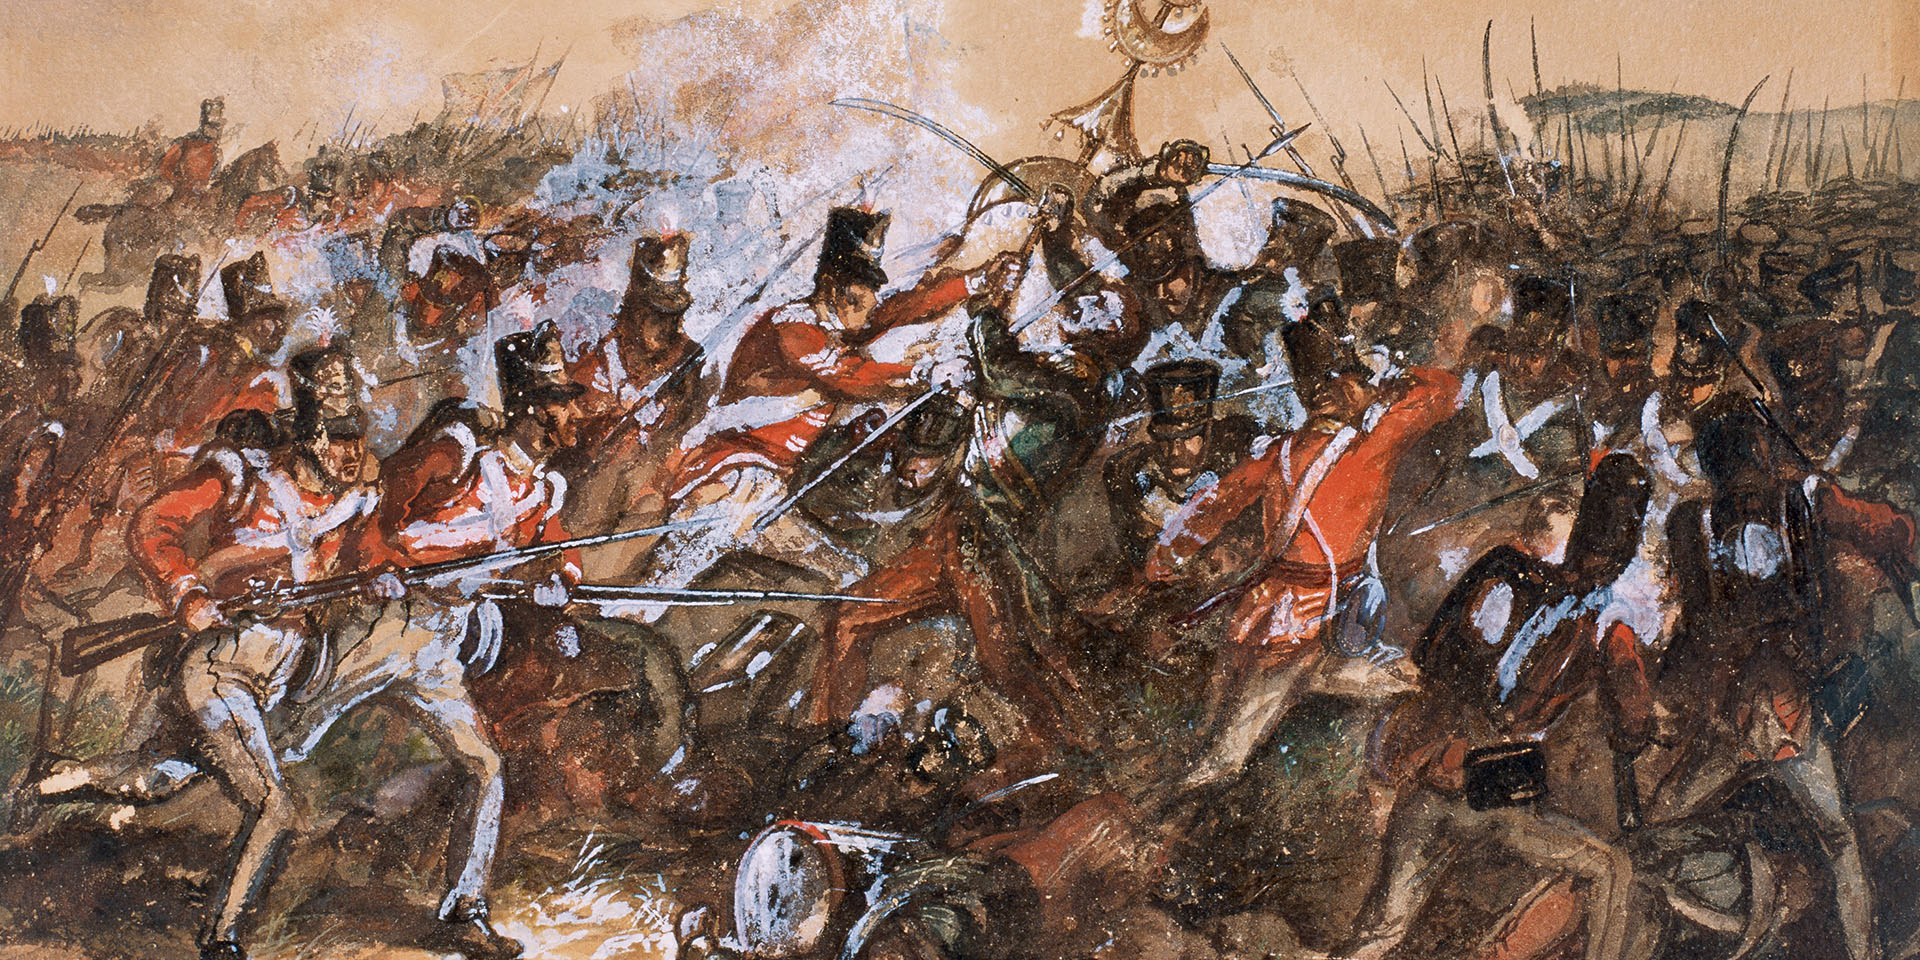 Capture of the Jingling Johnny by the 88th Foot at Salamanca, 1812